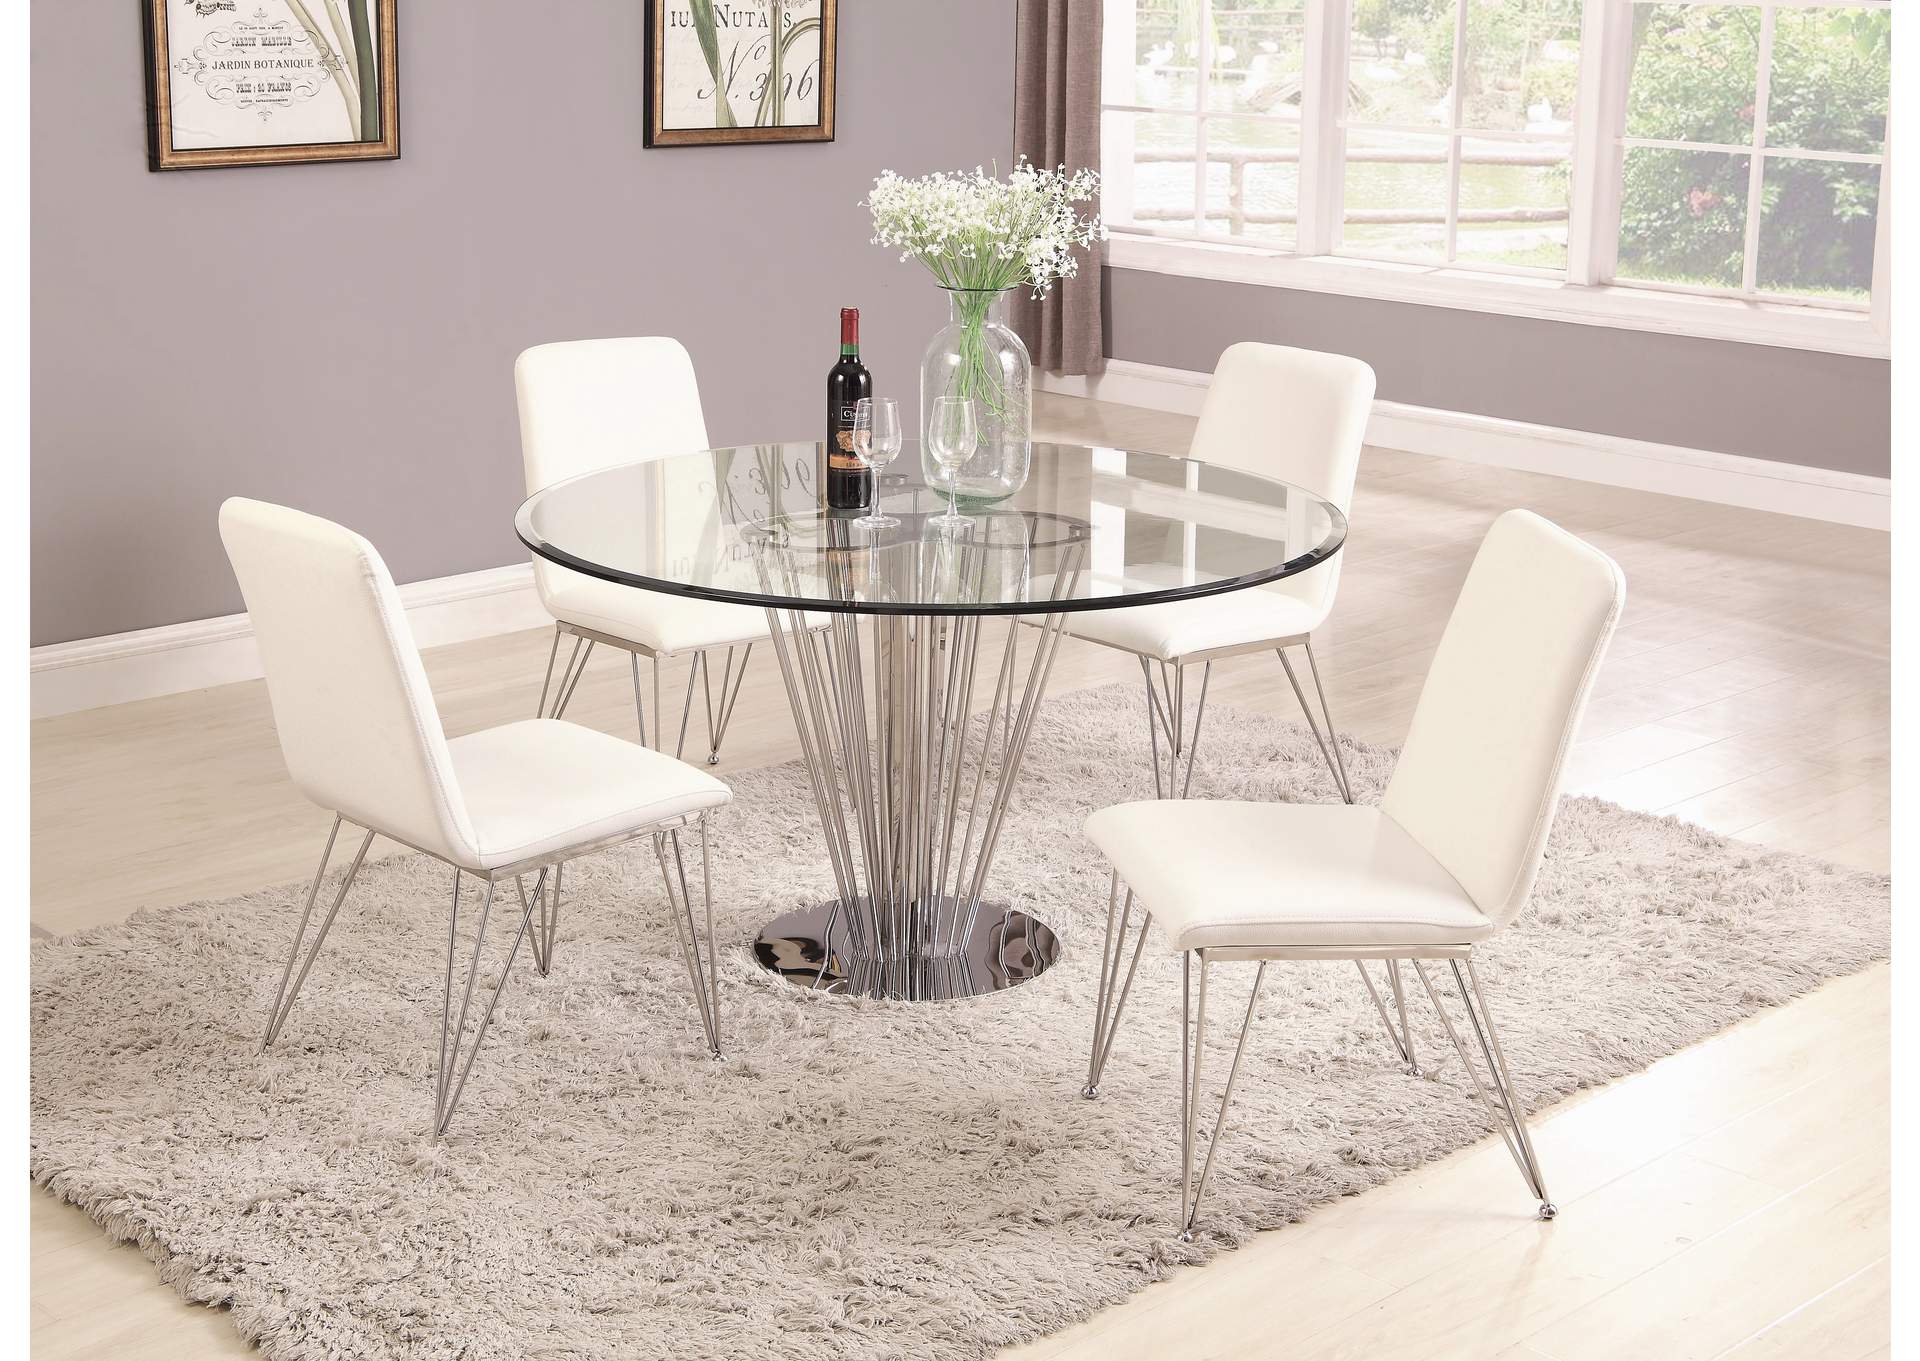 Fernanda Contemporary Round Glass Dining Table,Chintaly Imports